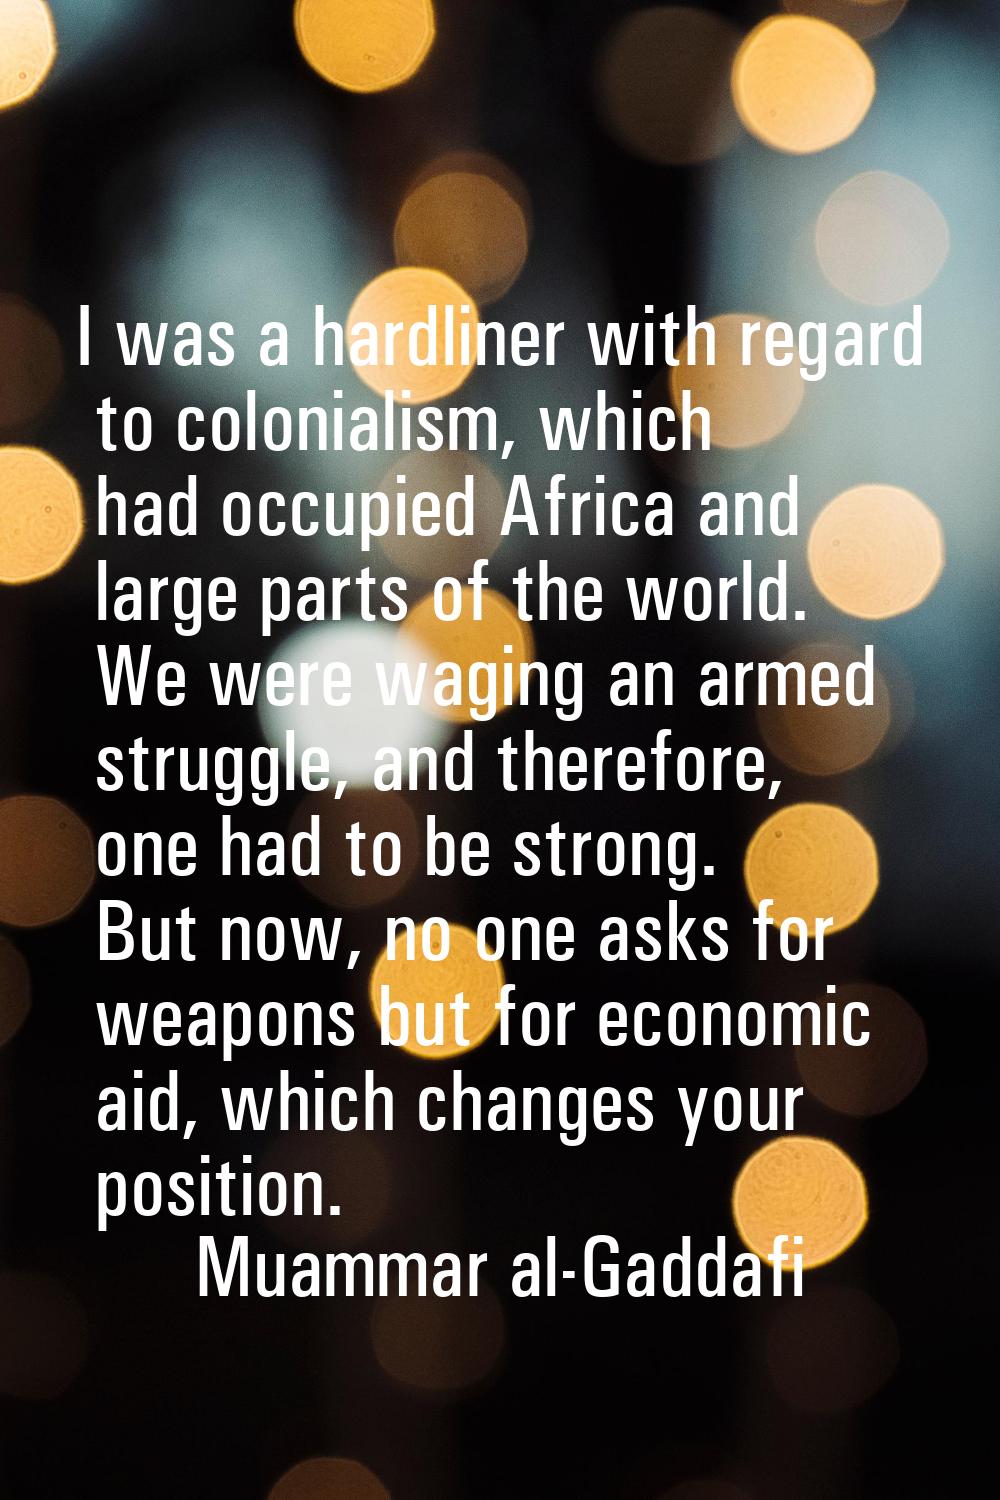 I was a hardliner with regard to colonialism, which had occupied Africa and large parts of the worl